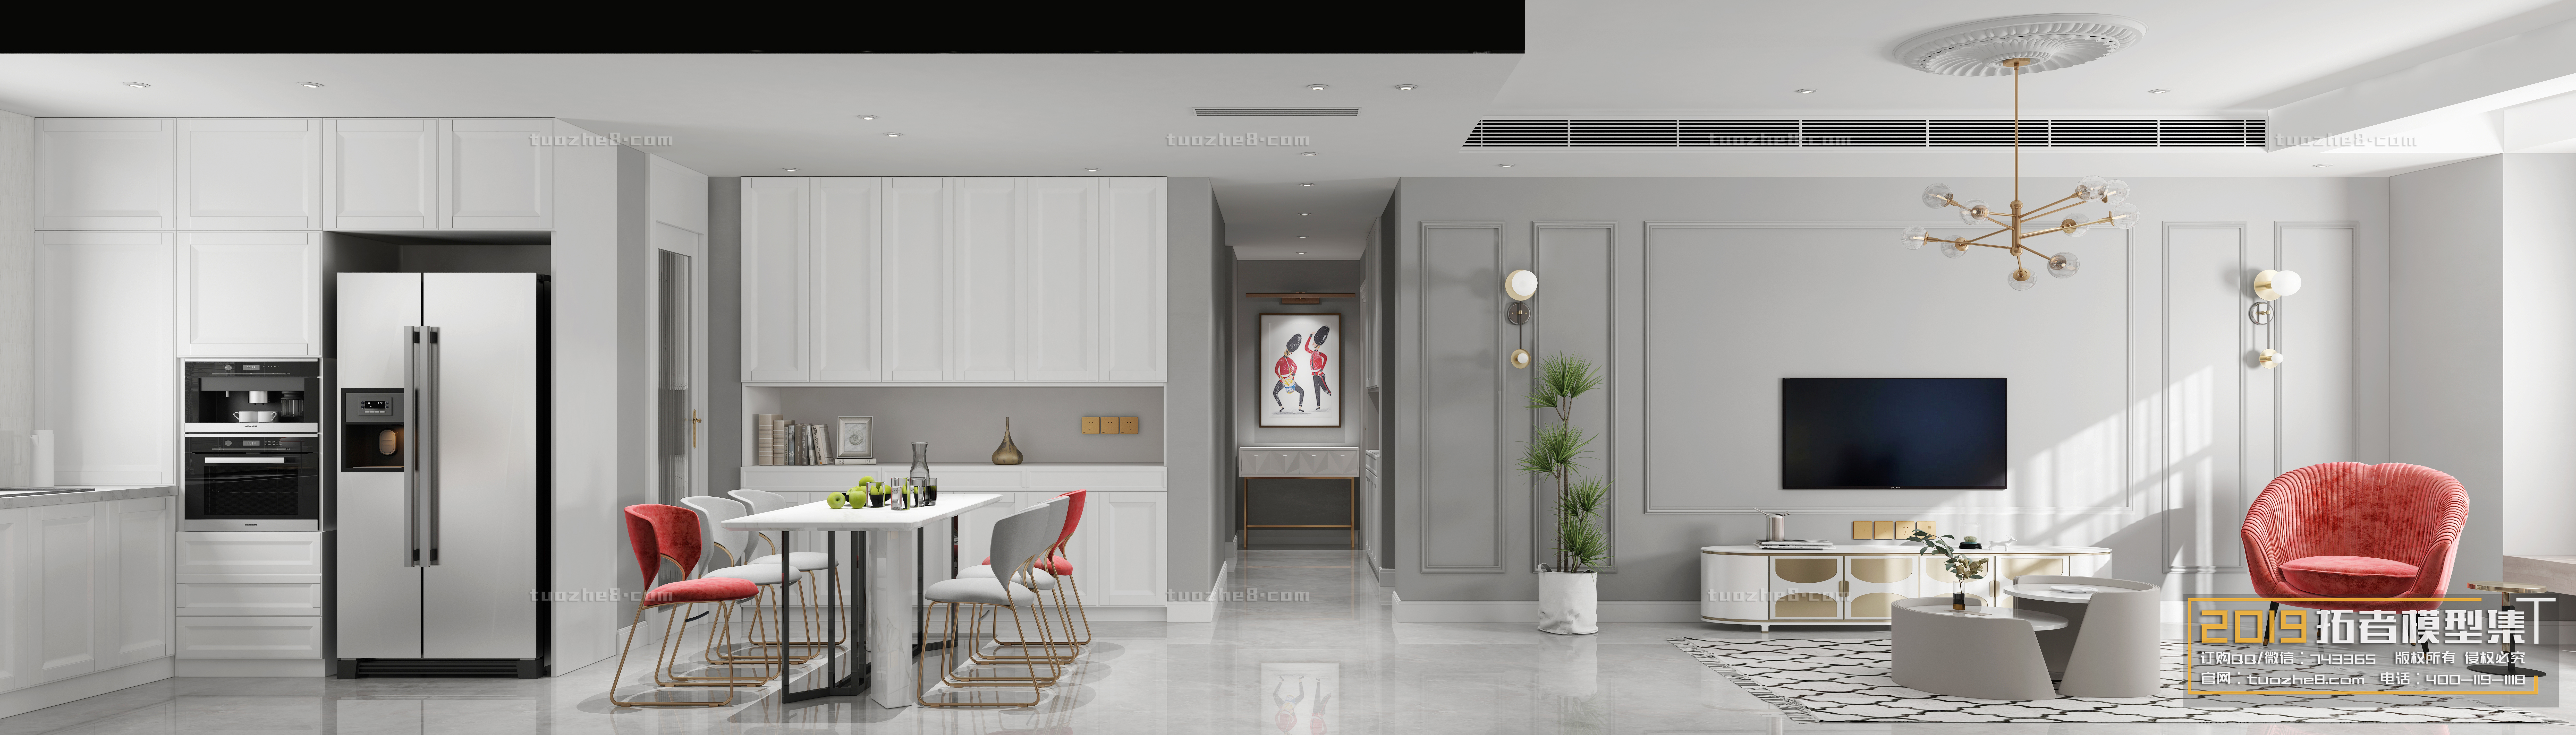 Extension Interior – LINGVING ROOM – NORDIC STYLES – 015 - thumbnail 1